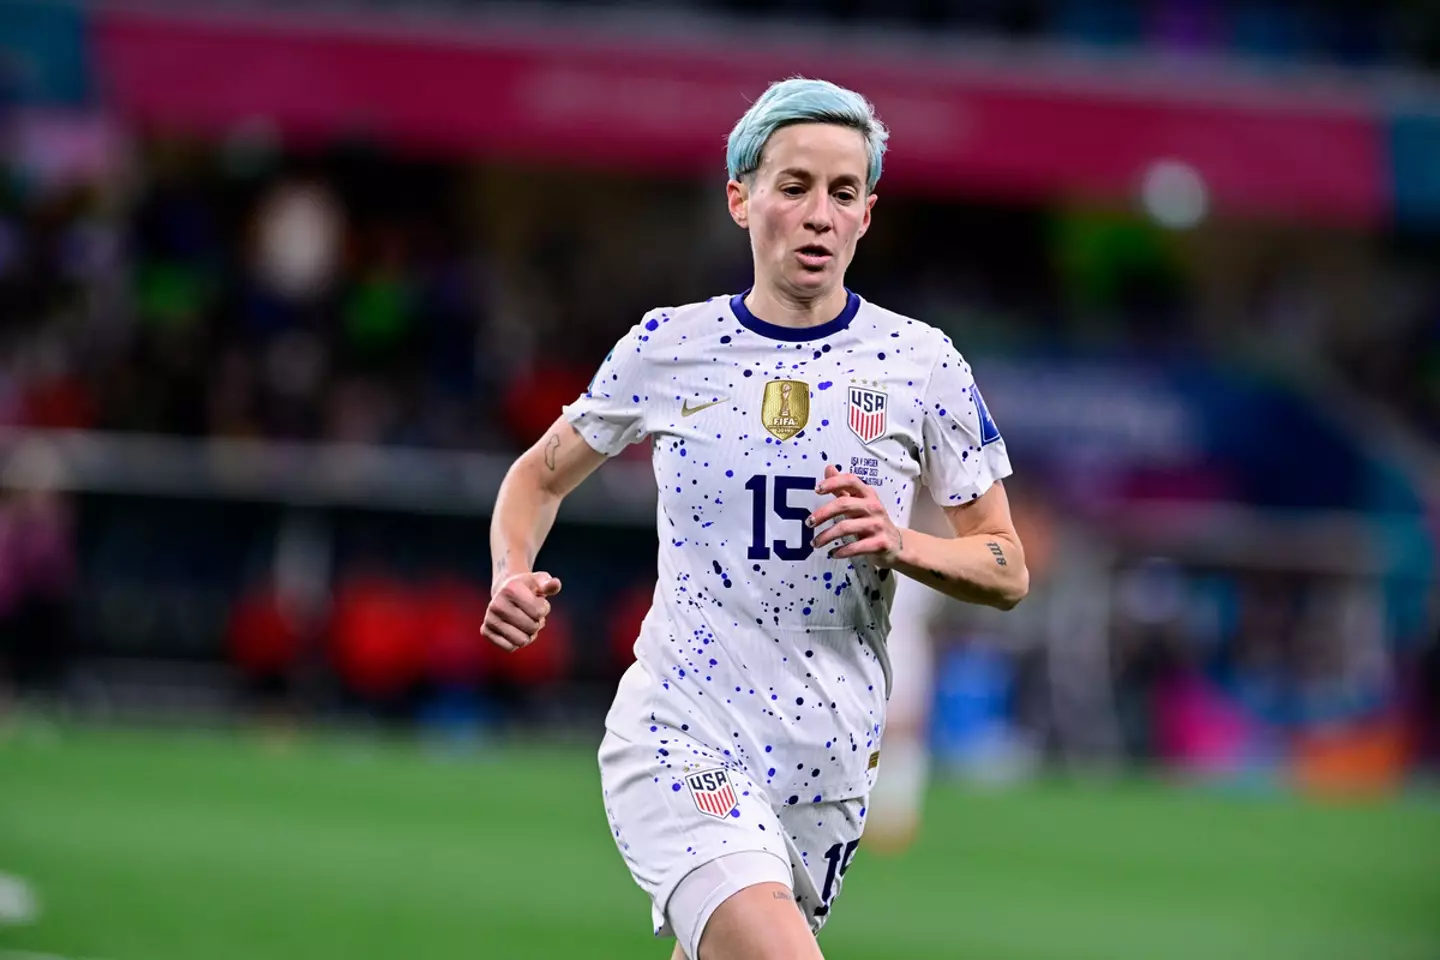 Megan Rapinoe has made over 200 appearances for her country.